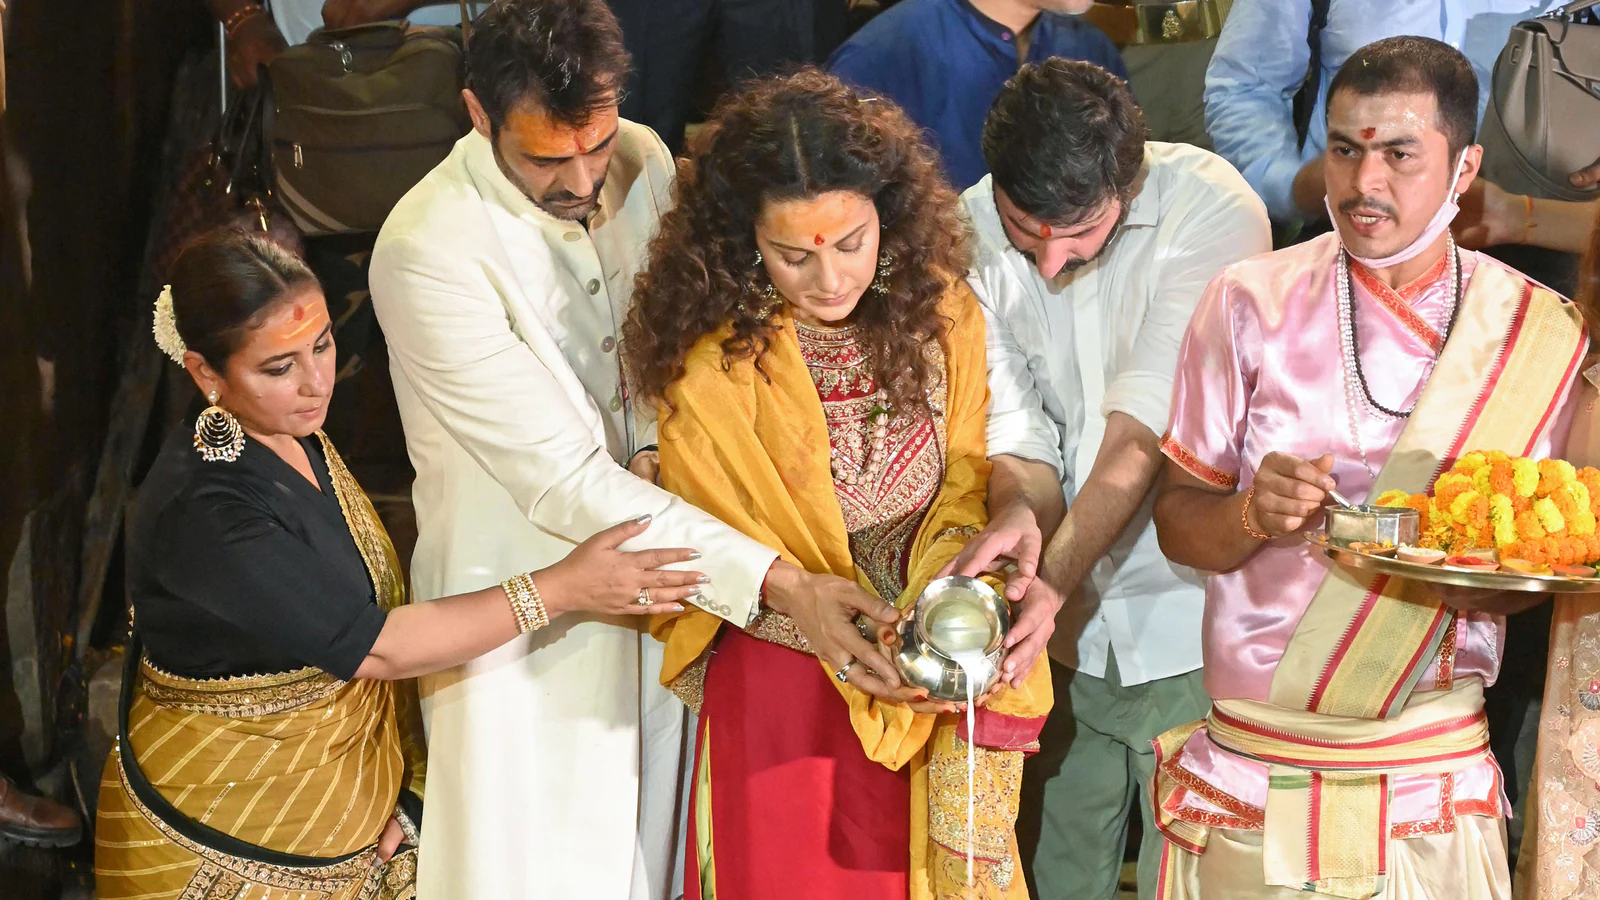 Kangana Ranaut on Gyanvapi mosque row: ‘Lord Shiva doesn’t need a structure, he’s in every particle’